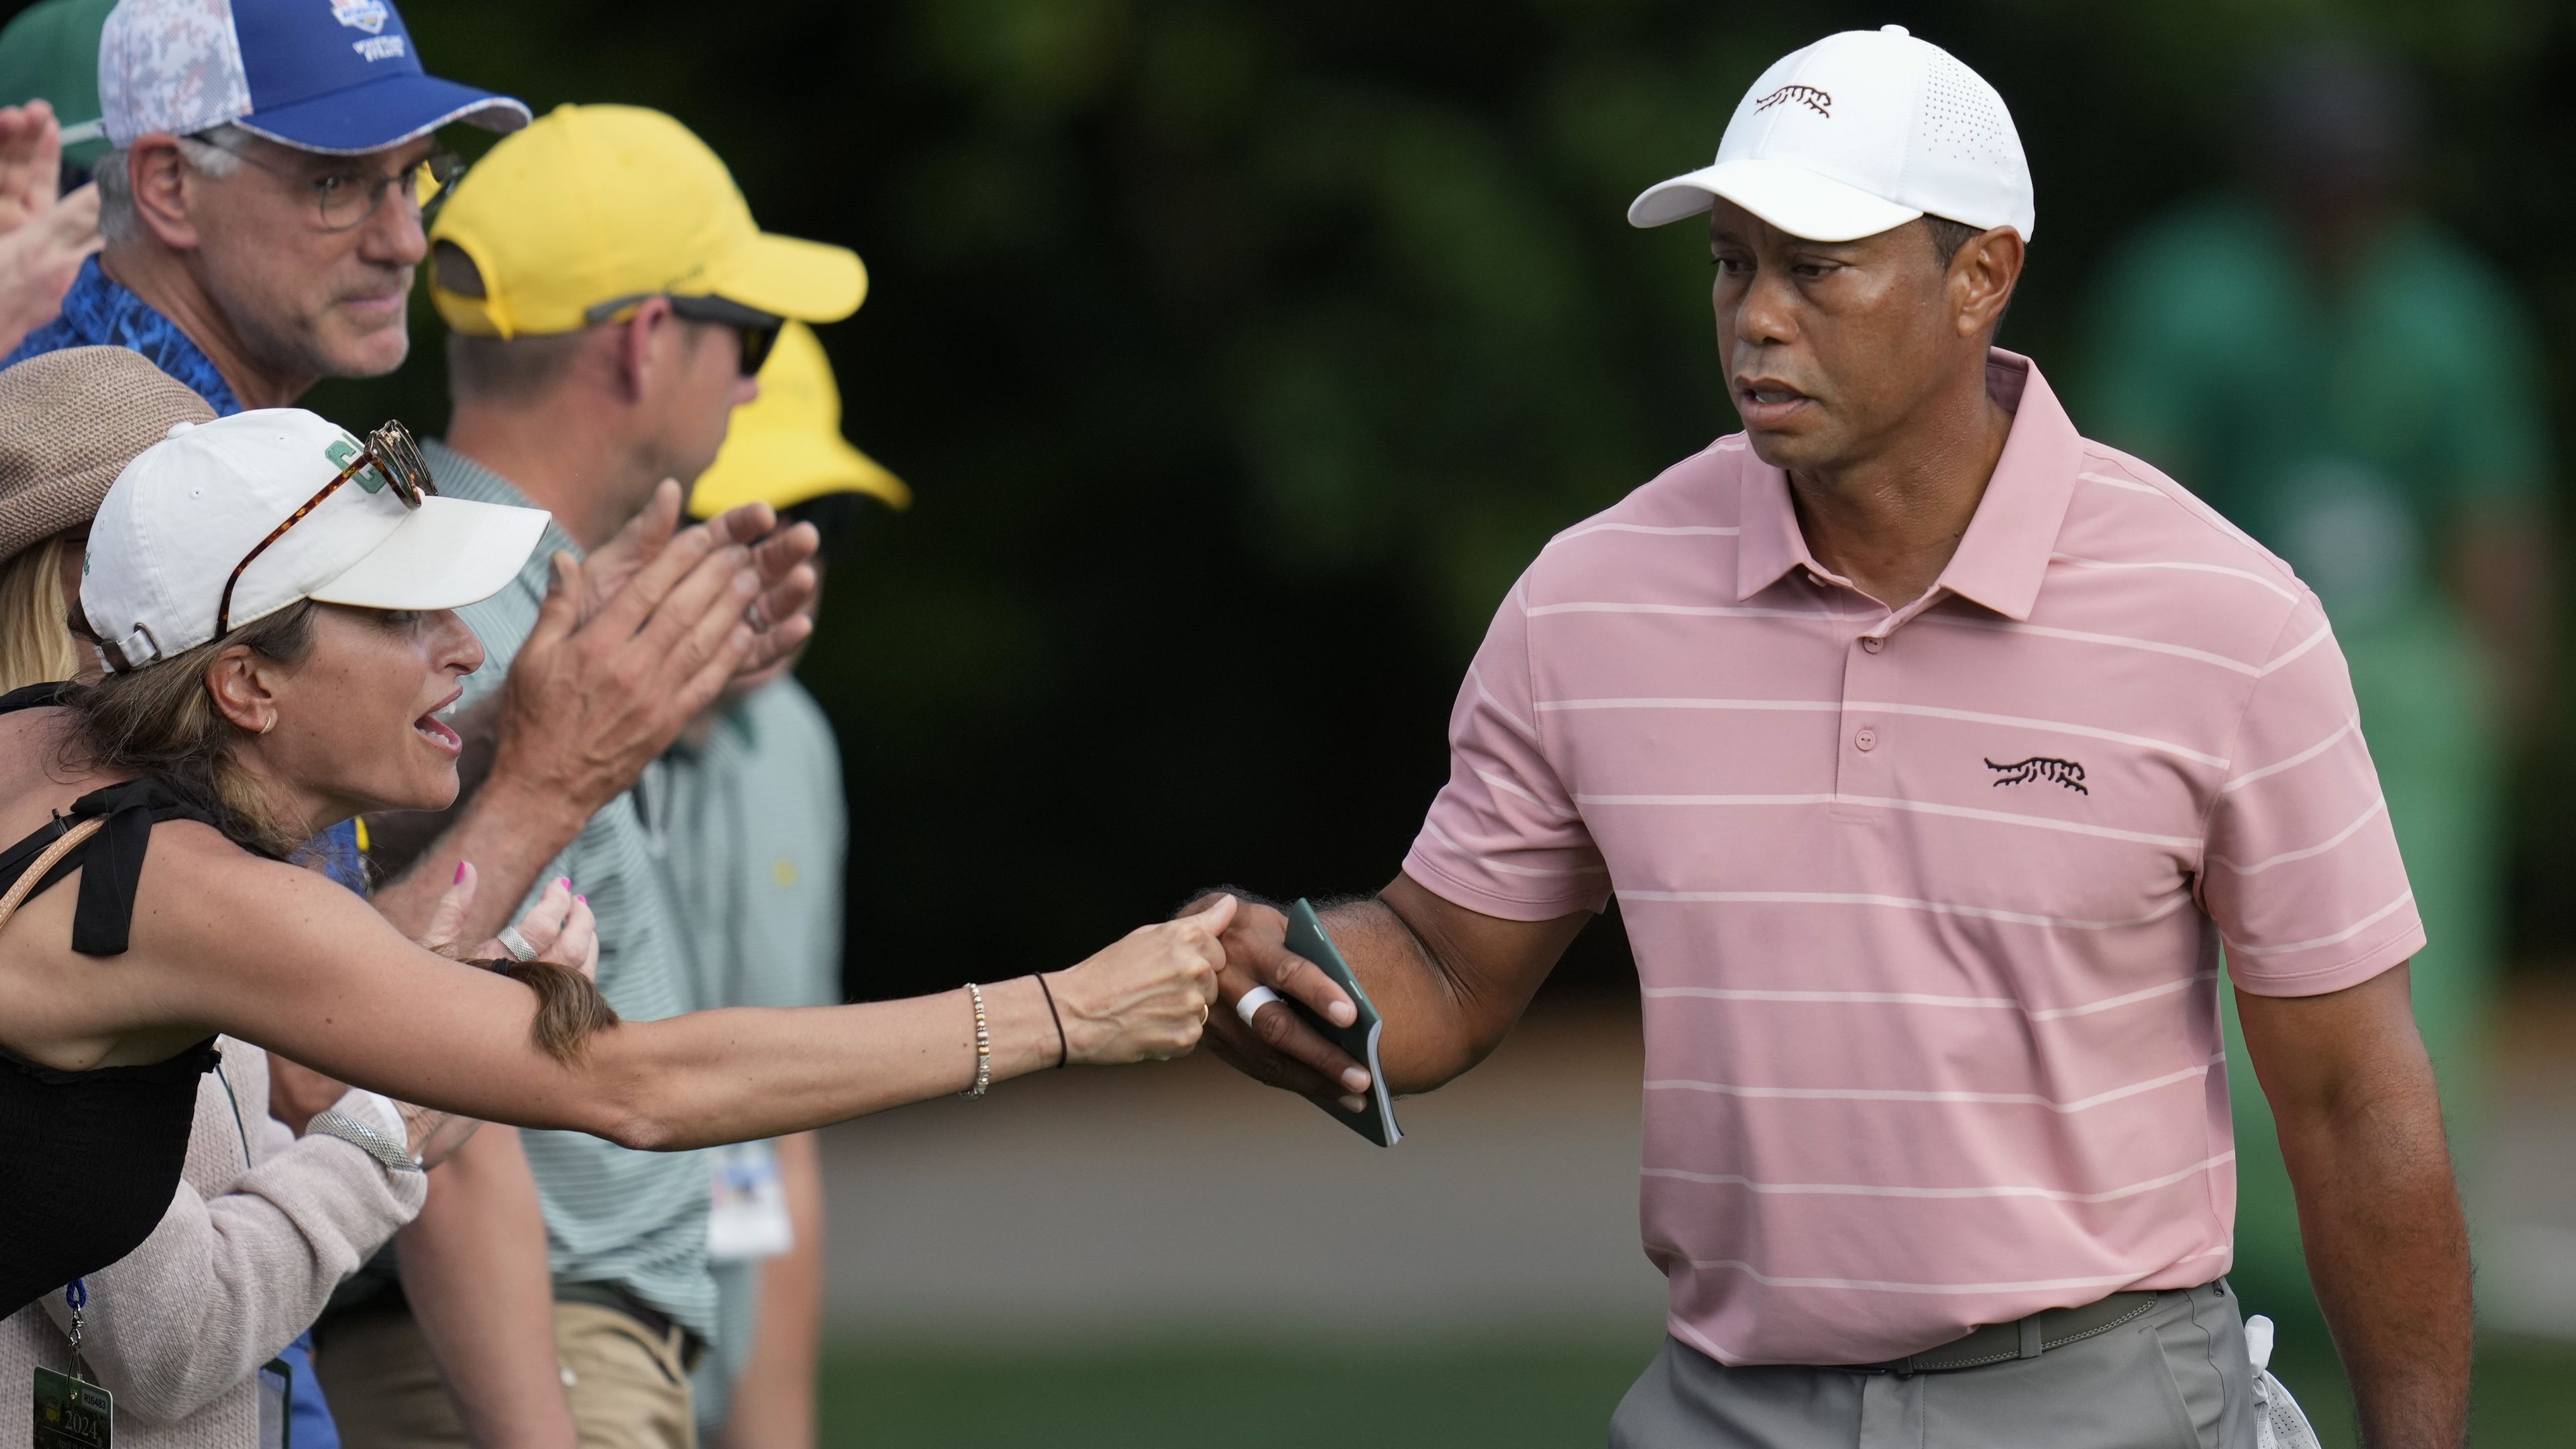 'He sure looks good': Stunning chip sends crowd wild as Tiger Woods eyes Masters record